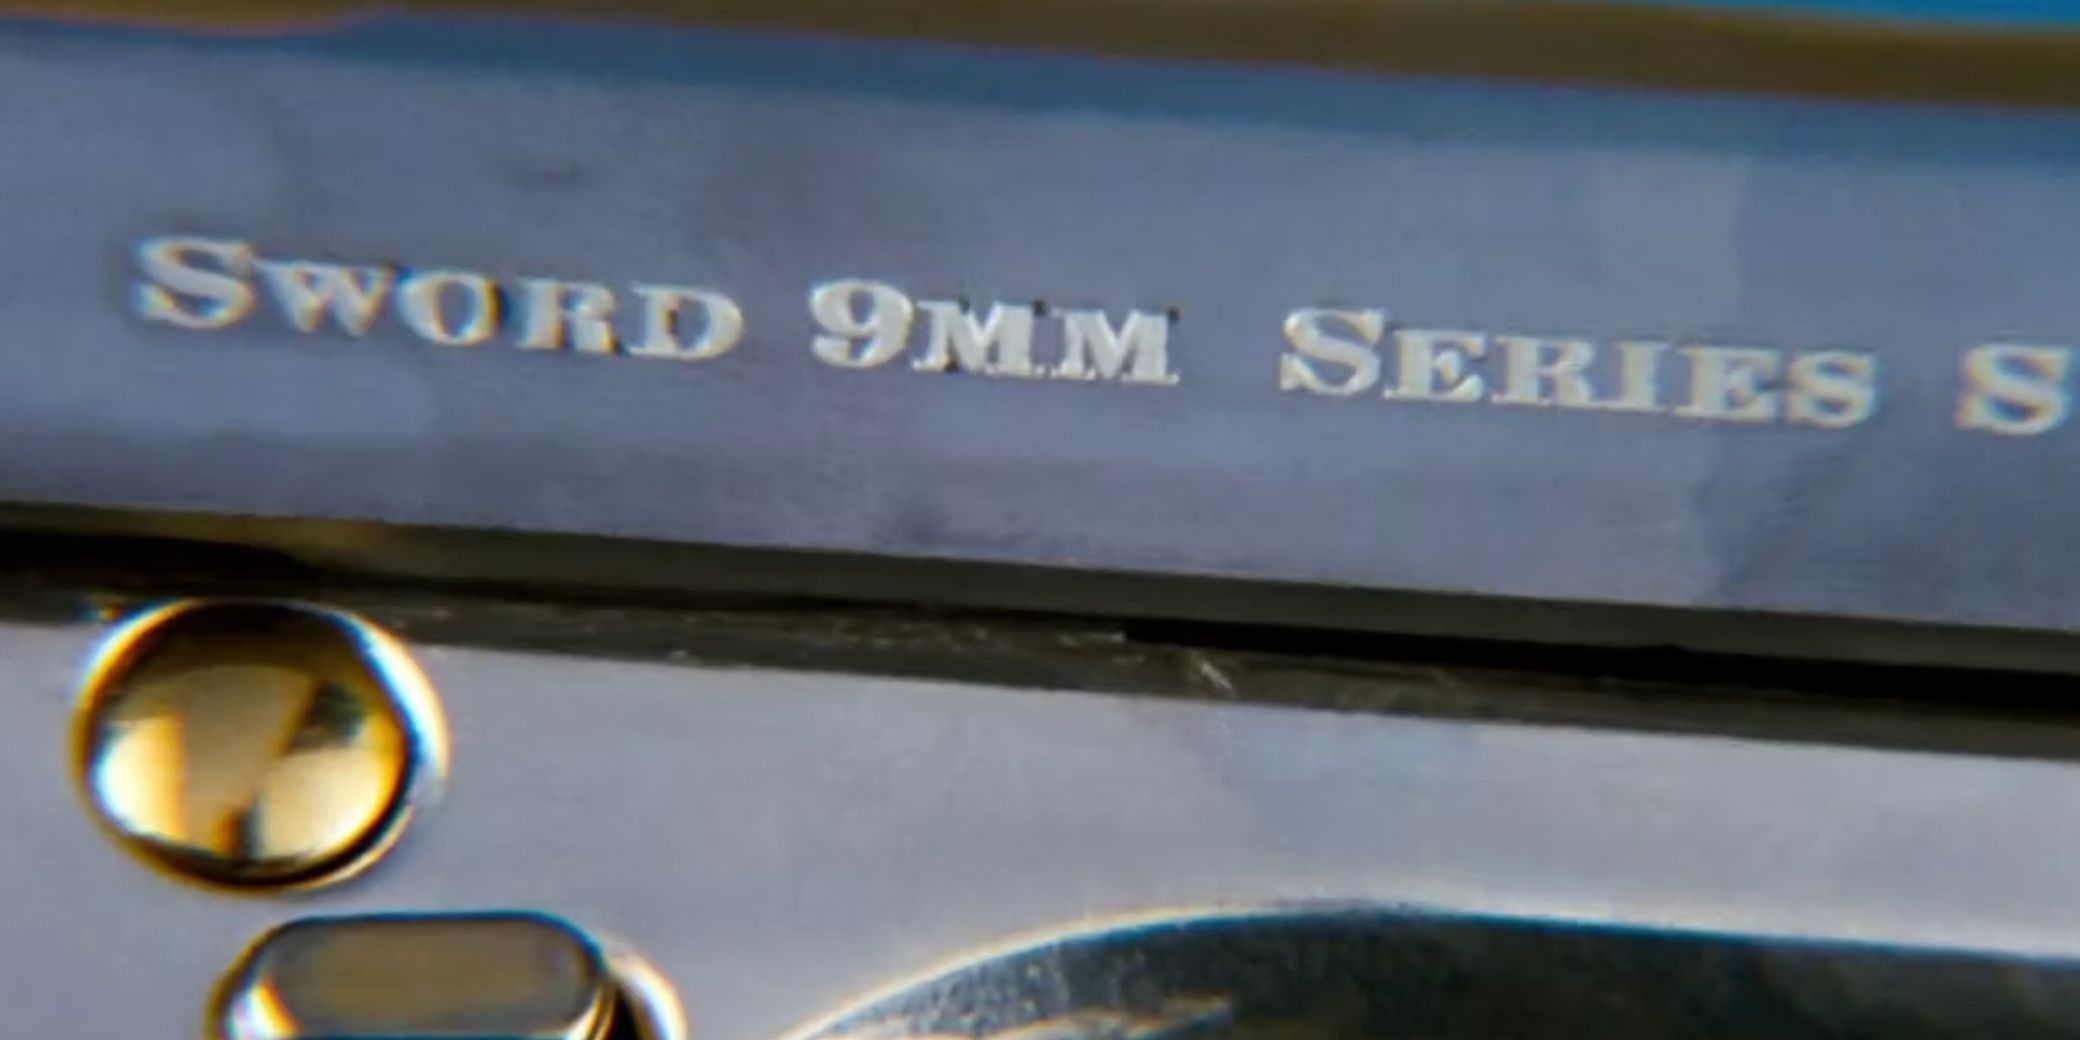 Sword 9MM Series S is stamped on the side of a gun in the 1996 Romeo and Juliet movie